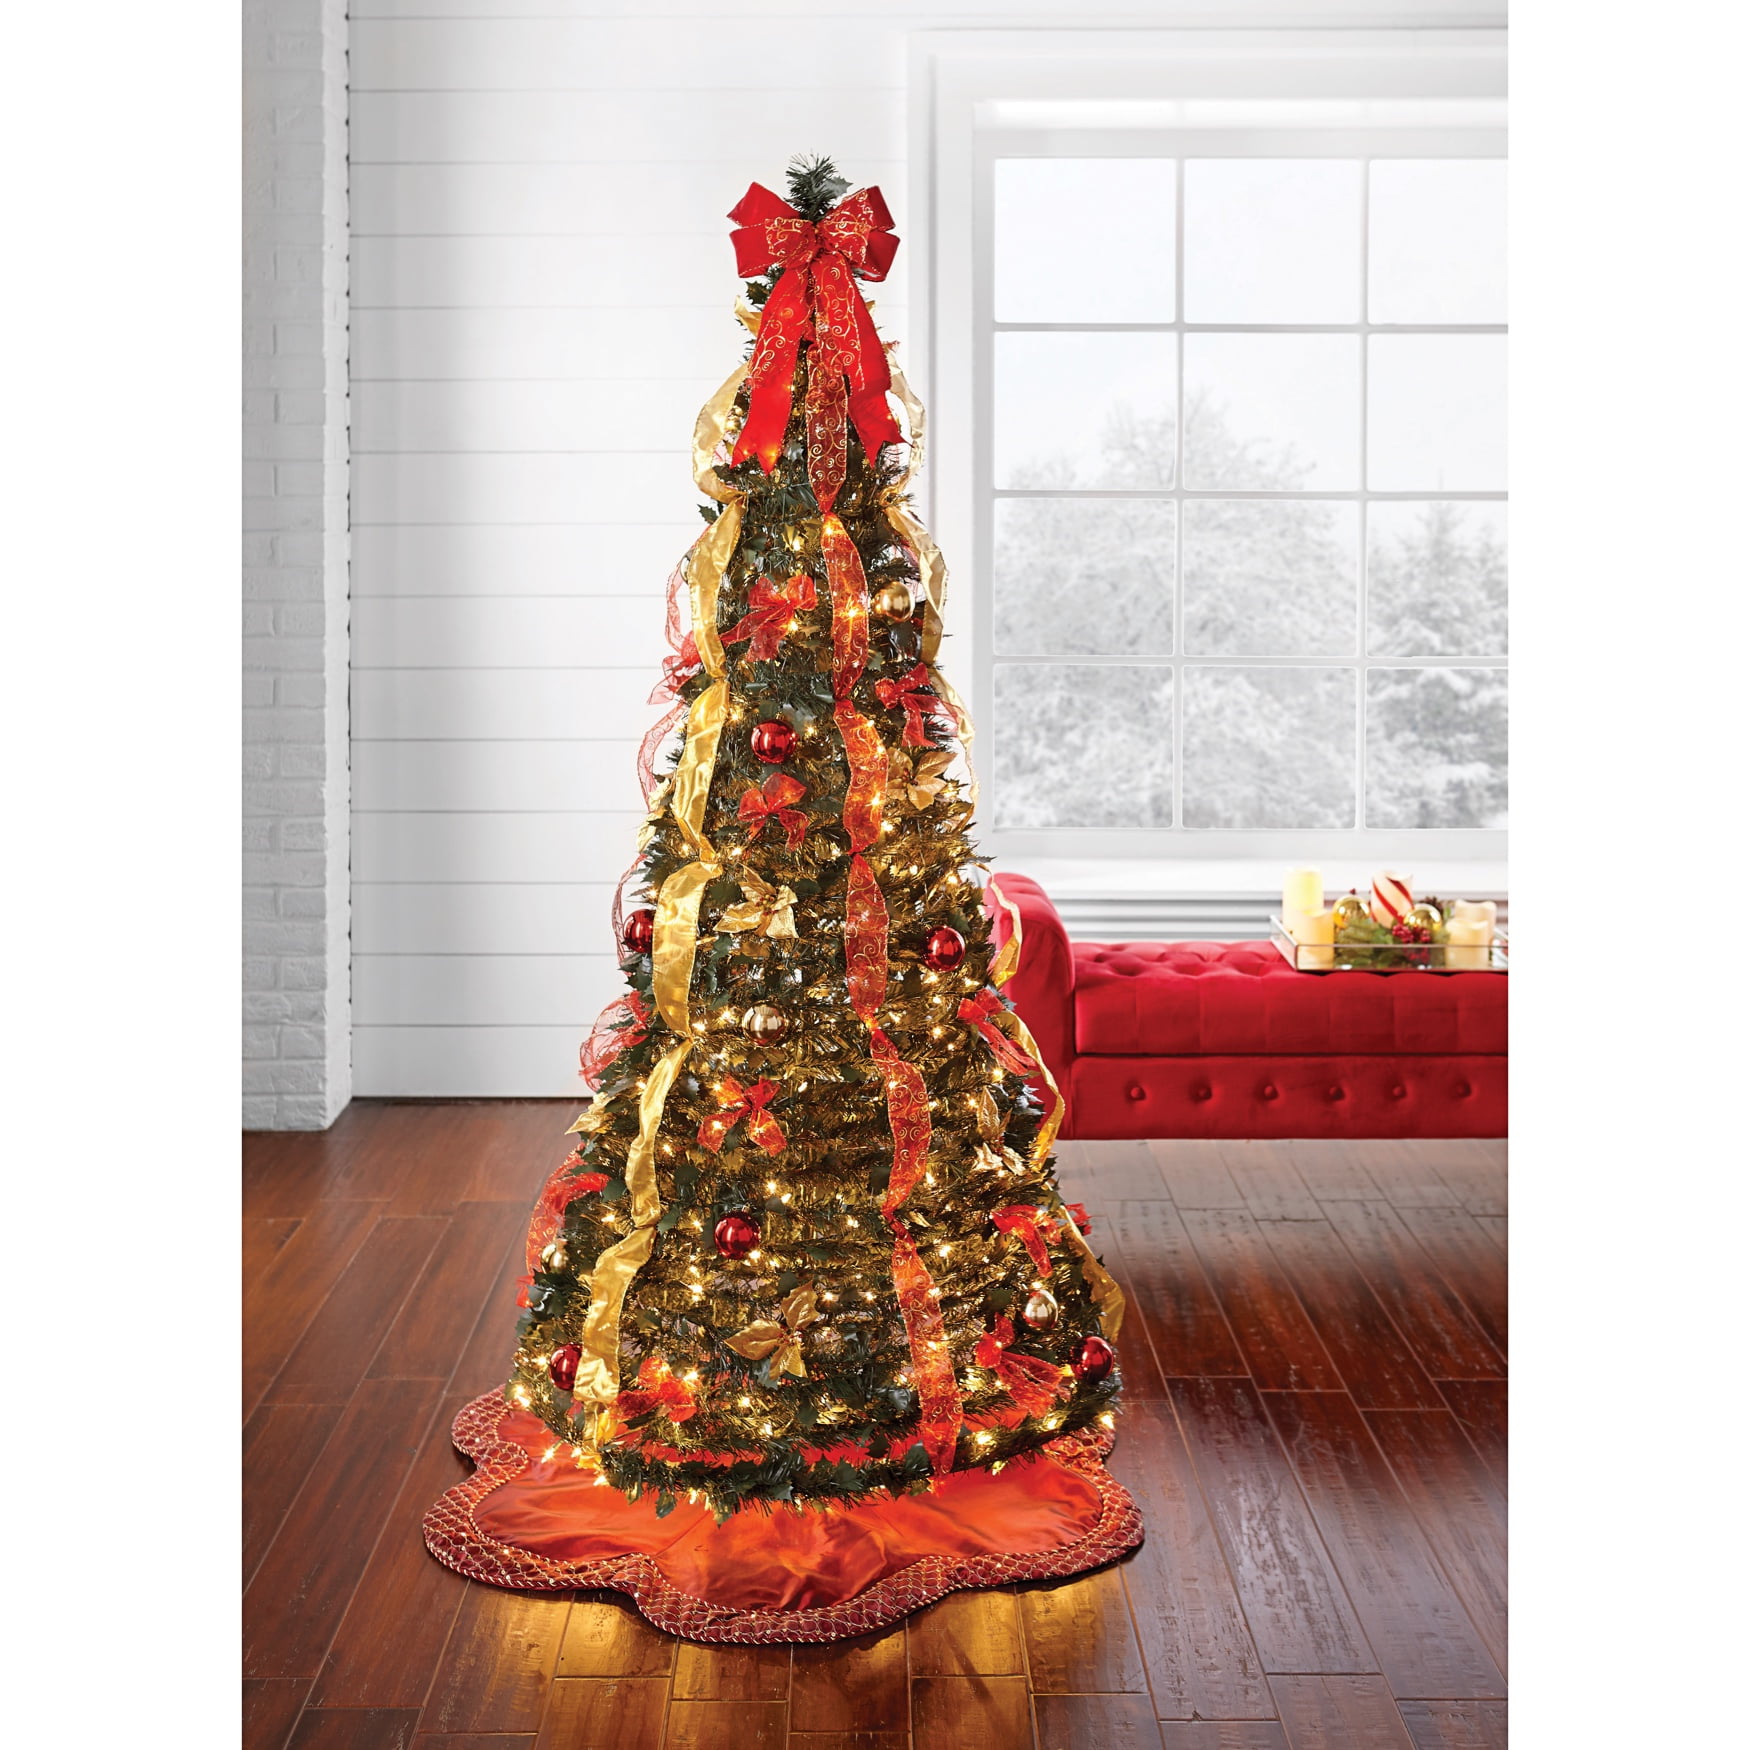 Brylanehome Christmas Fully Decorated Pre-Lit 6 Foot Pop-Up Christmas Tree, Red